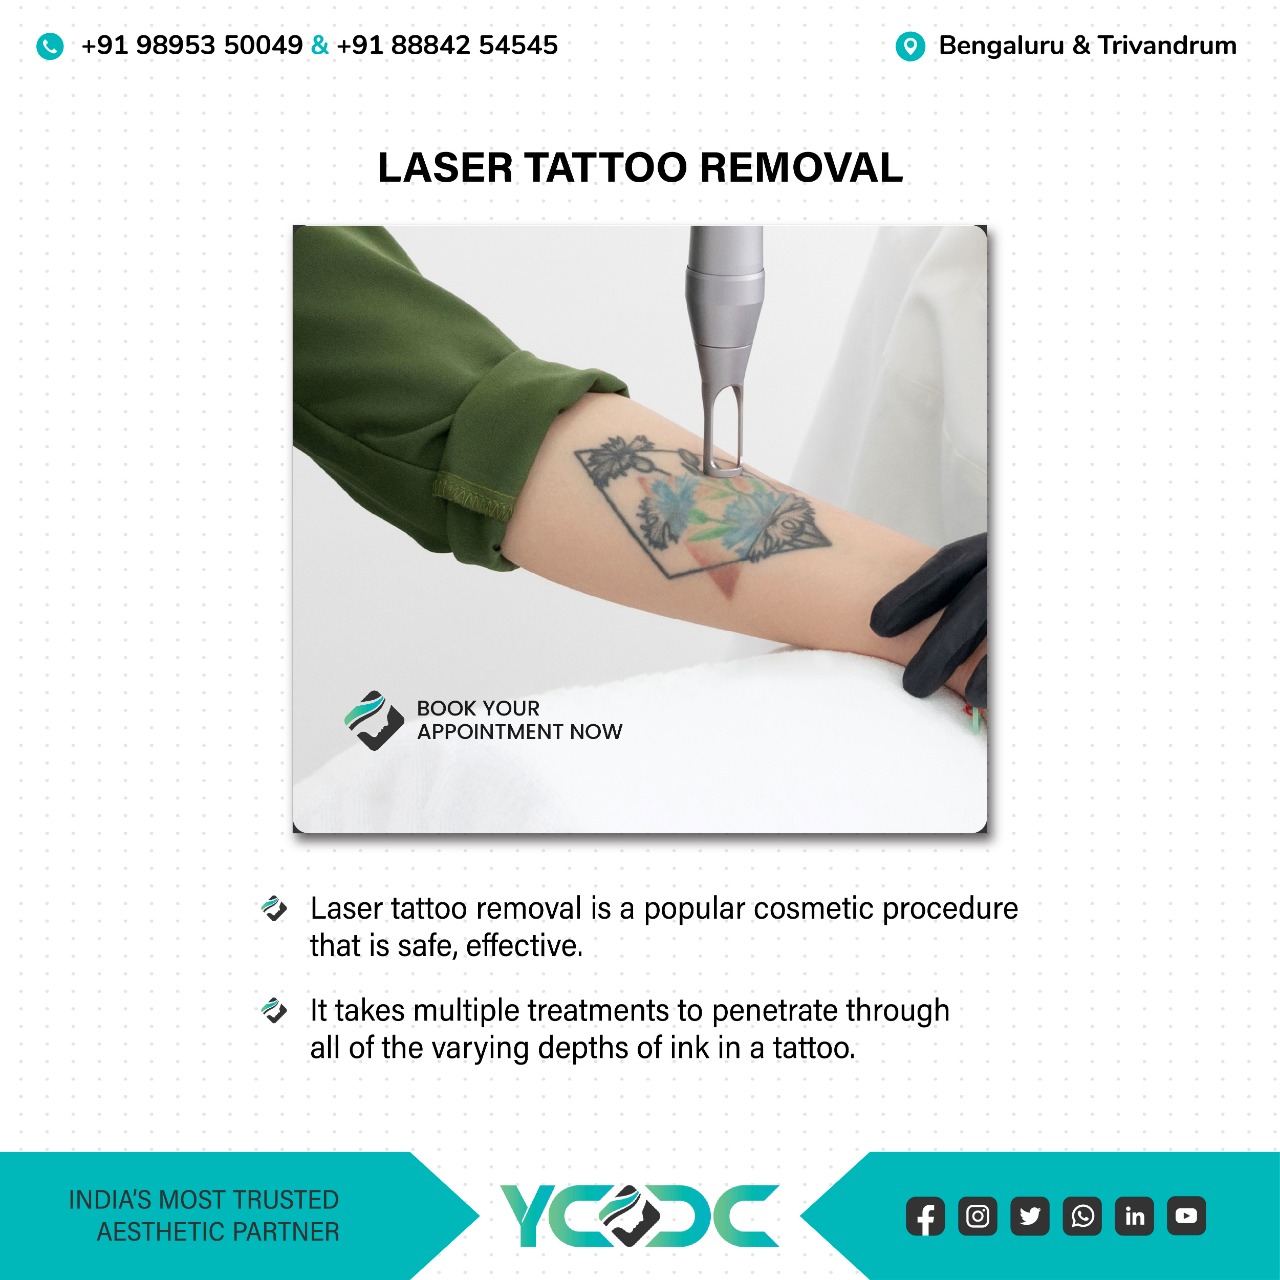 Laser Tattoo Removal Treatment in India